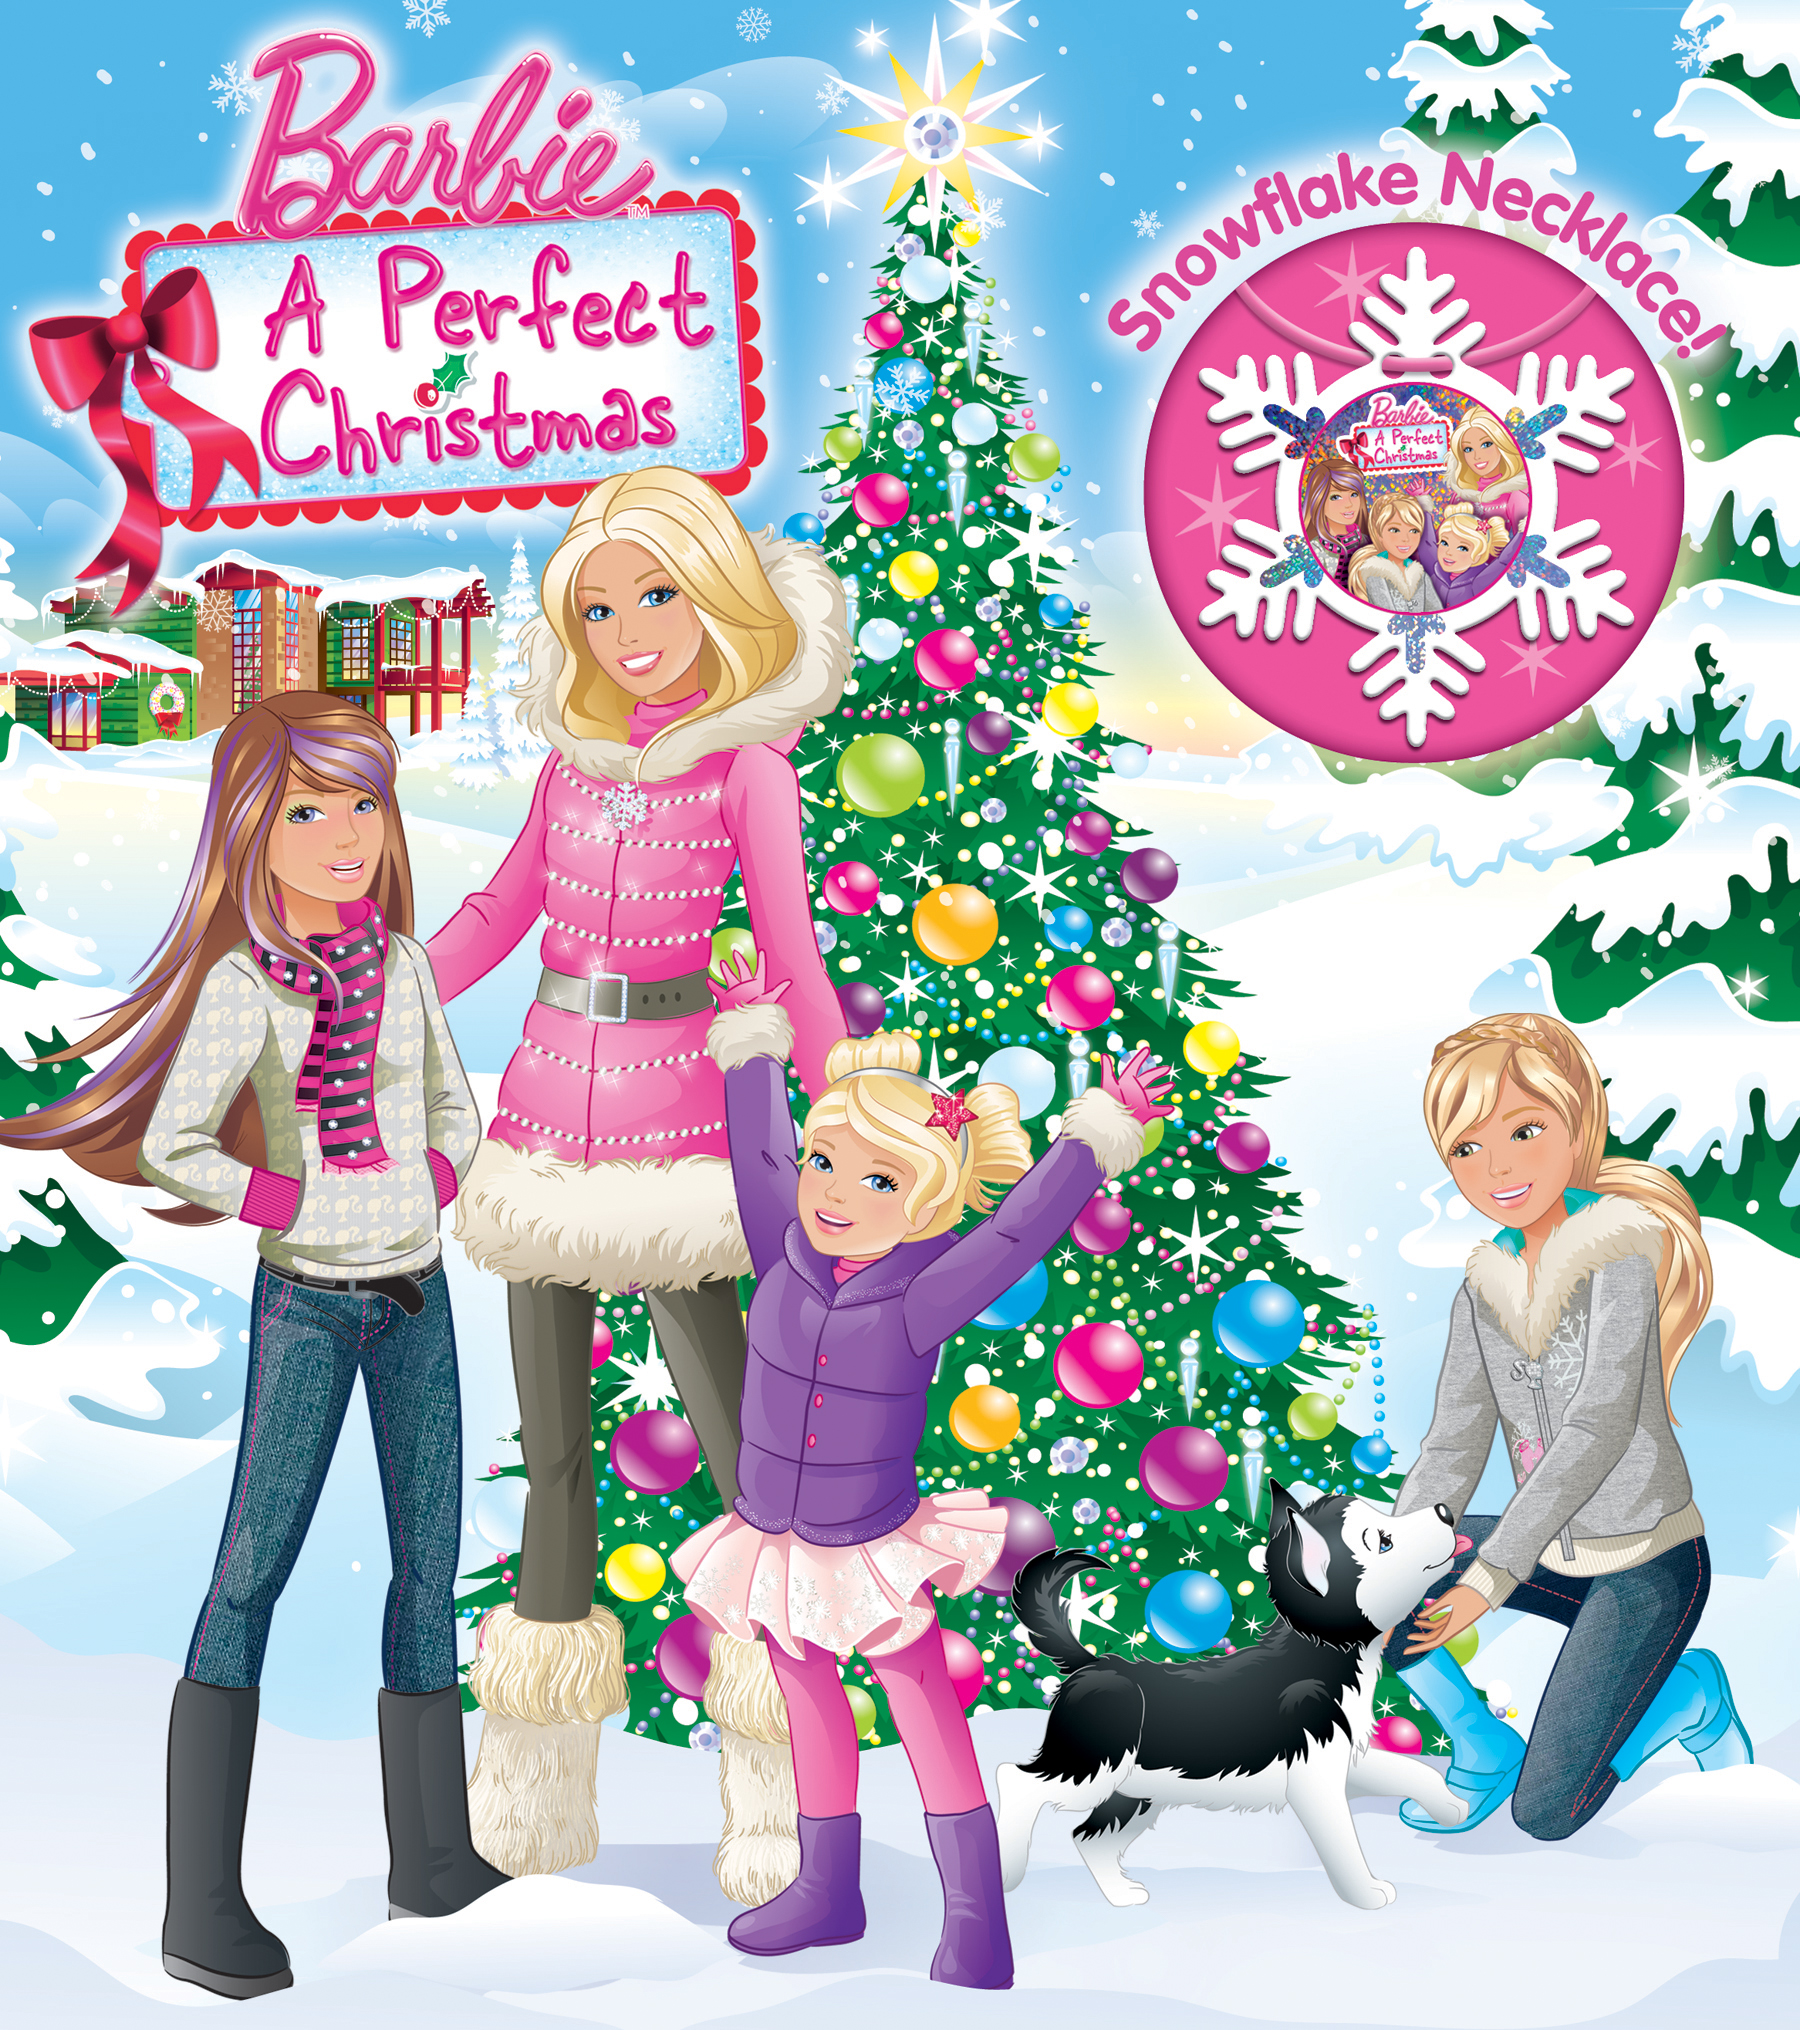 http://images2.wikia.nocookie.net/__cb20130315175326/barbie-movies/images/0/03/Barbie_A_Perfect_Christmas_Storybook_Snowflake_Necklace_Final.png